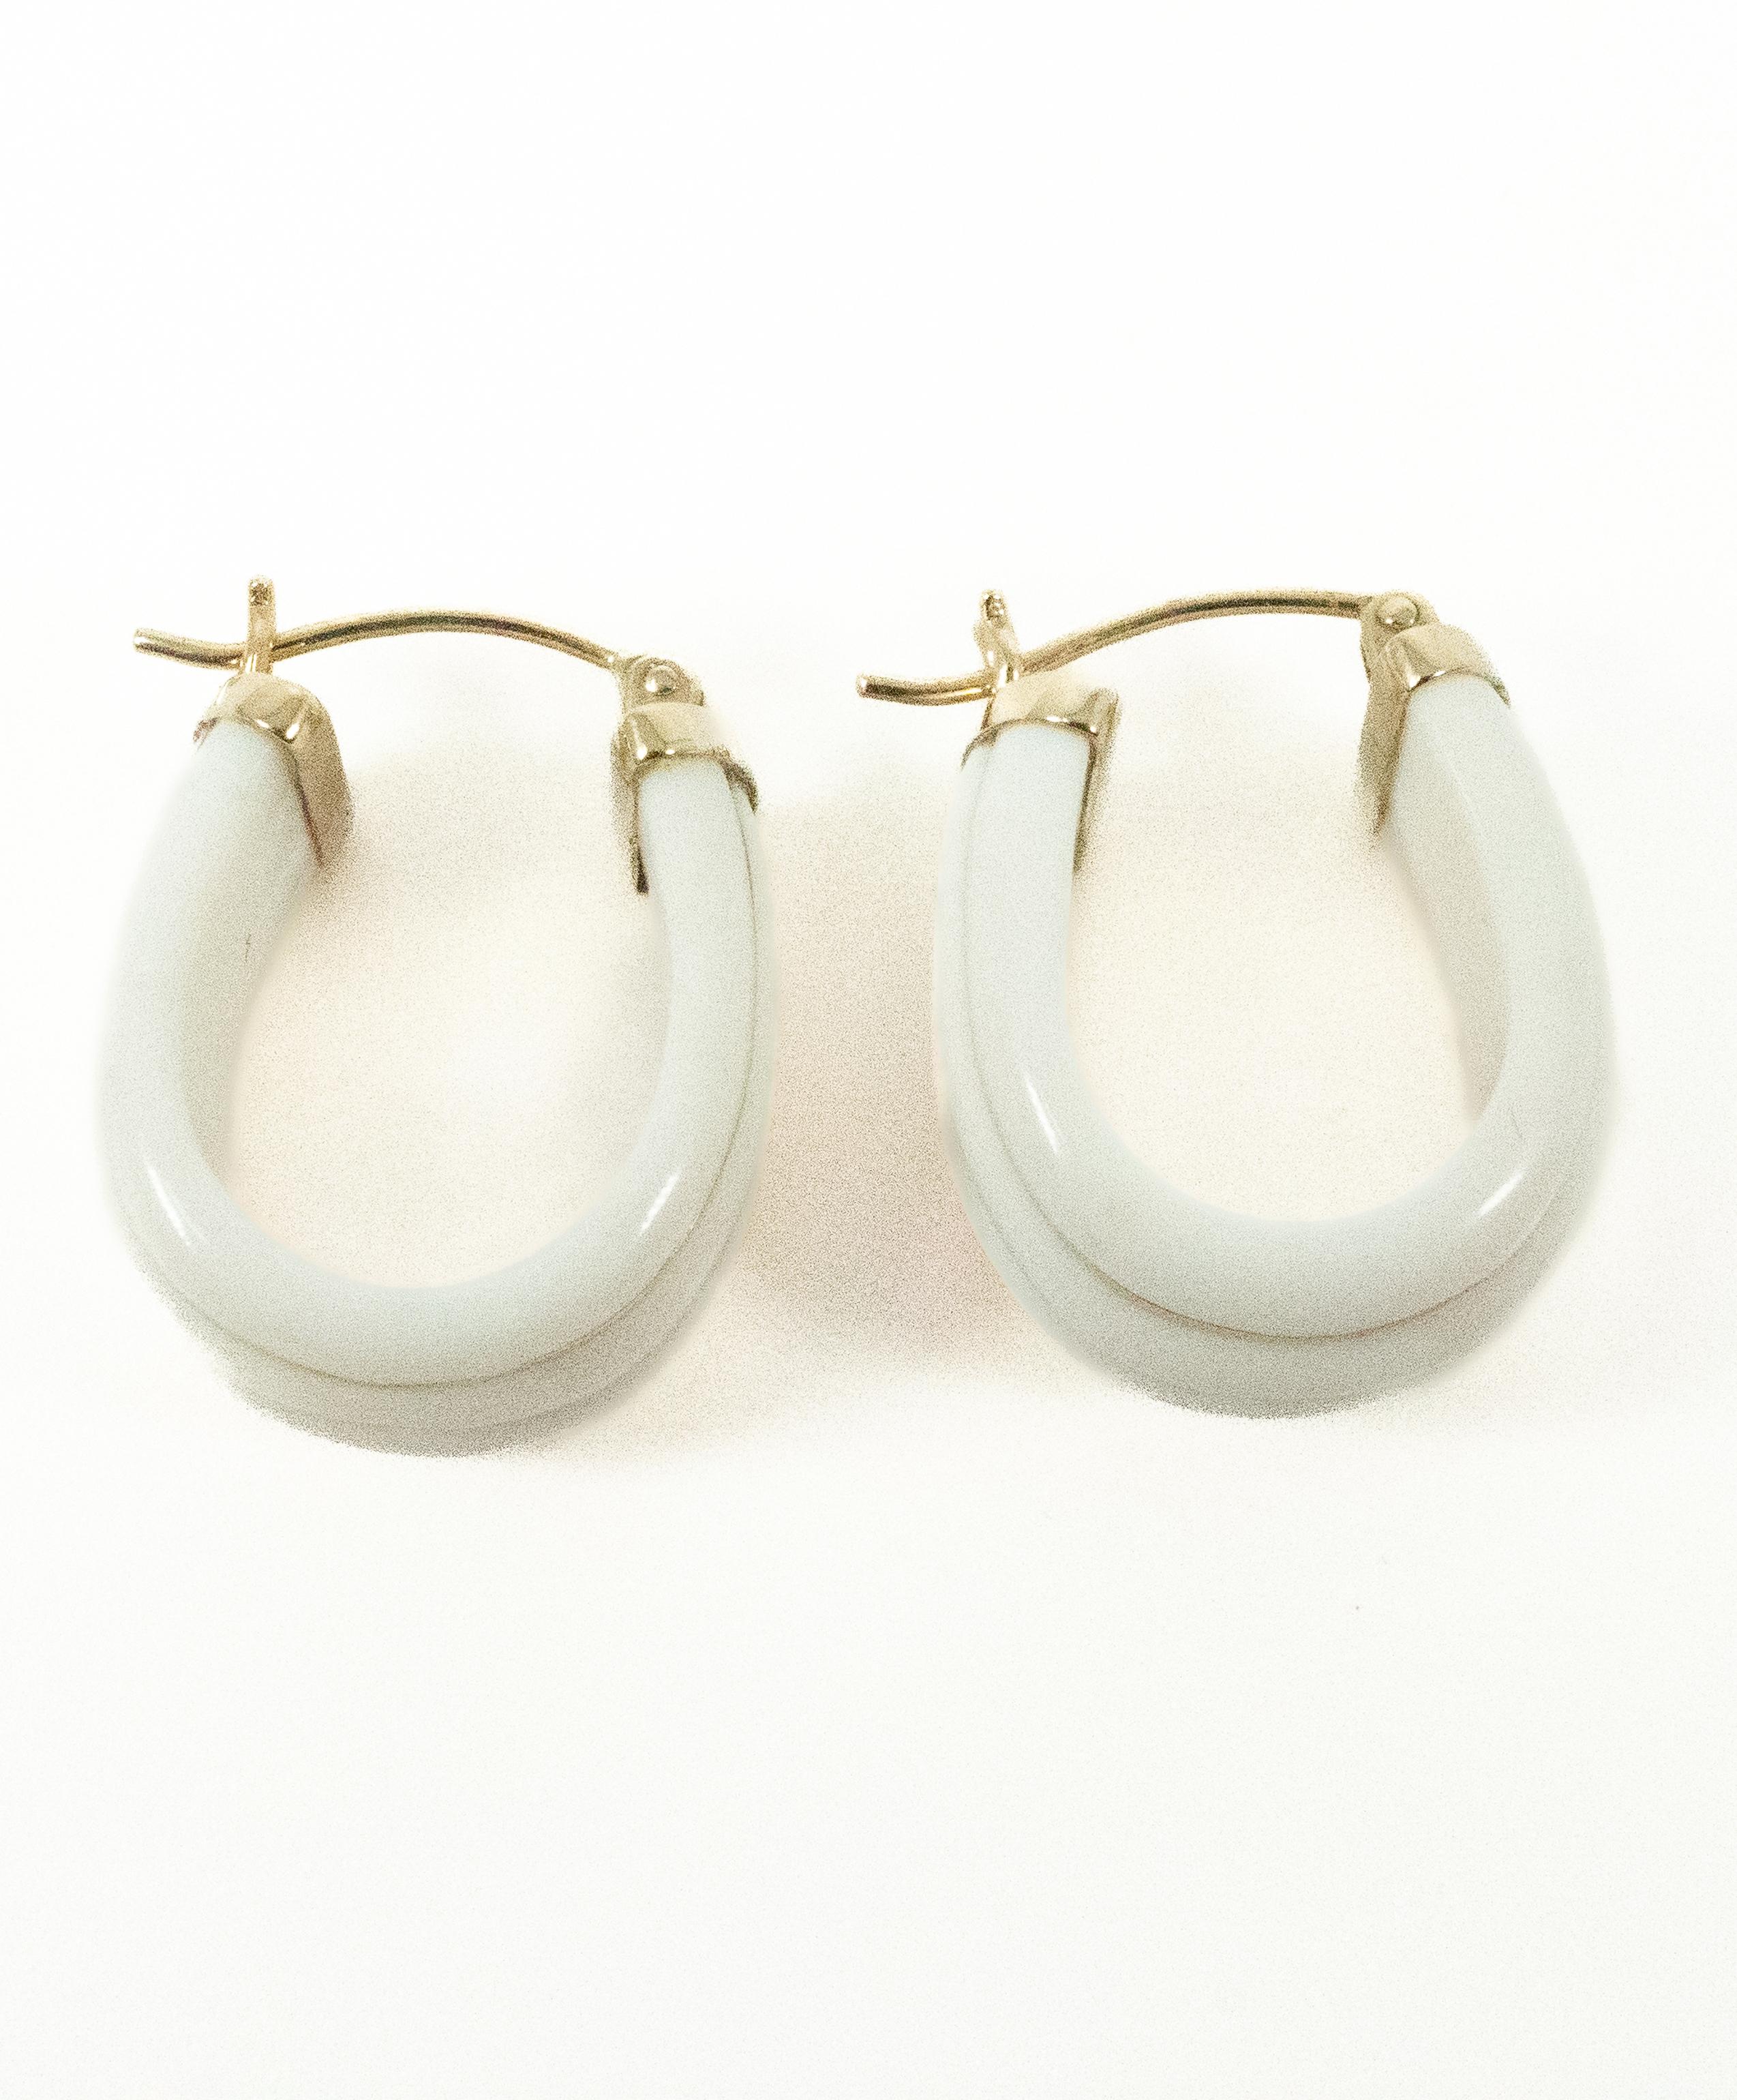 White Ceramic and 14 Karat Yellow Gold Hoop Earrings In Good Condition For Sale In Dallas, TX